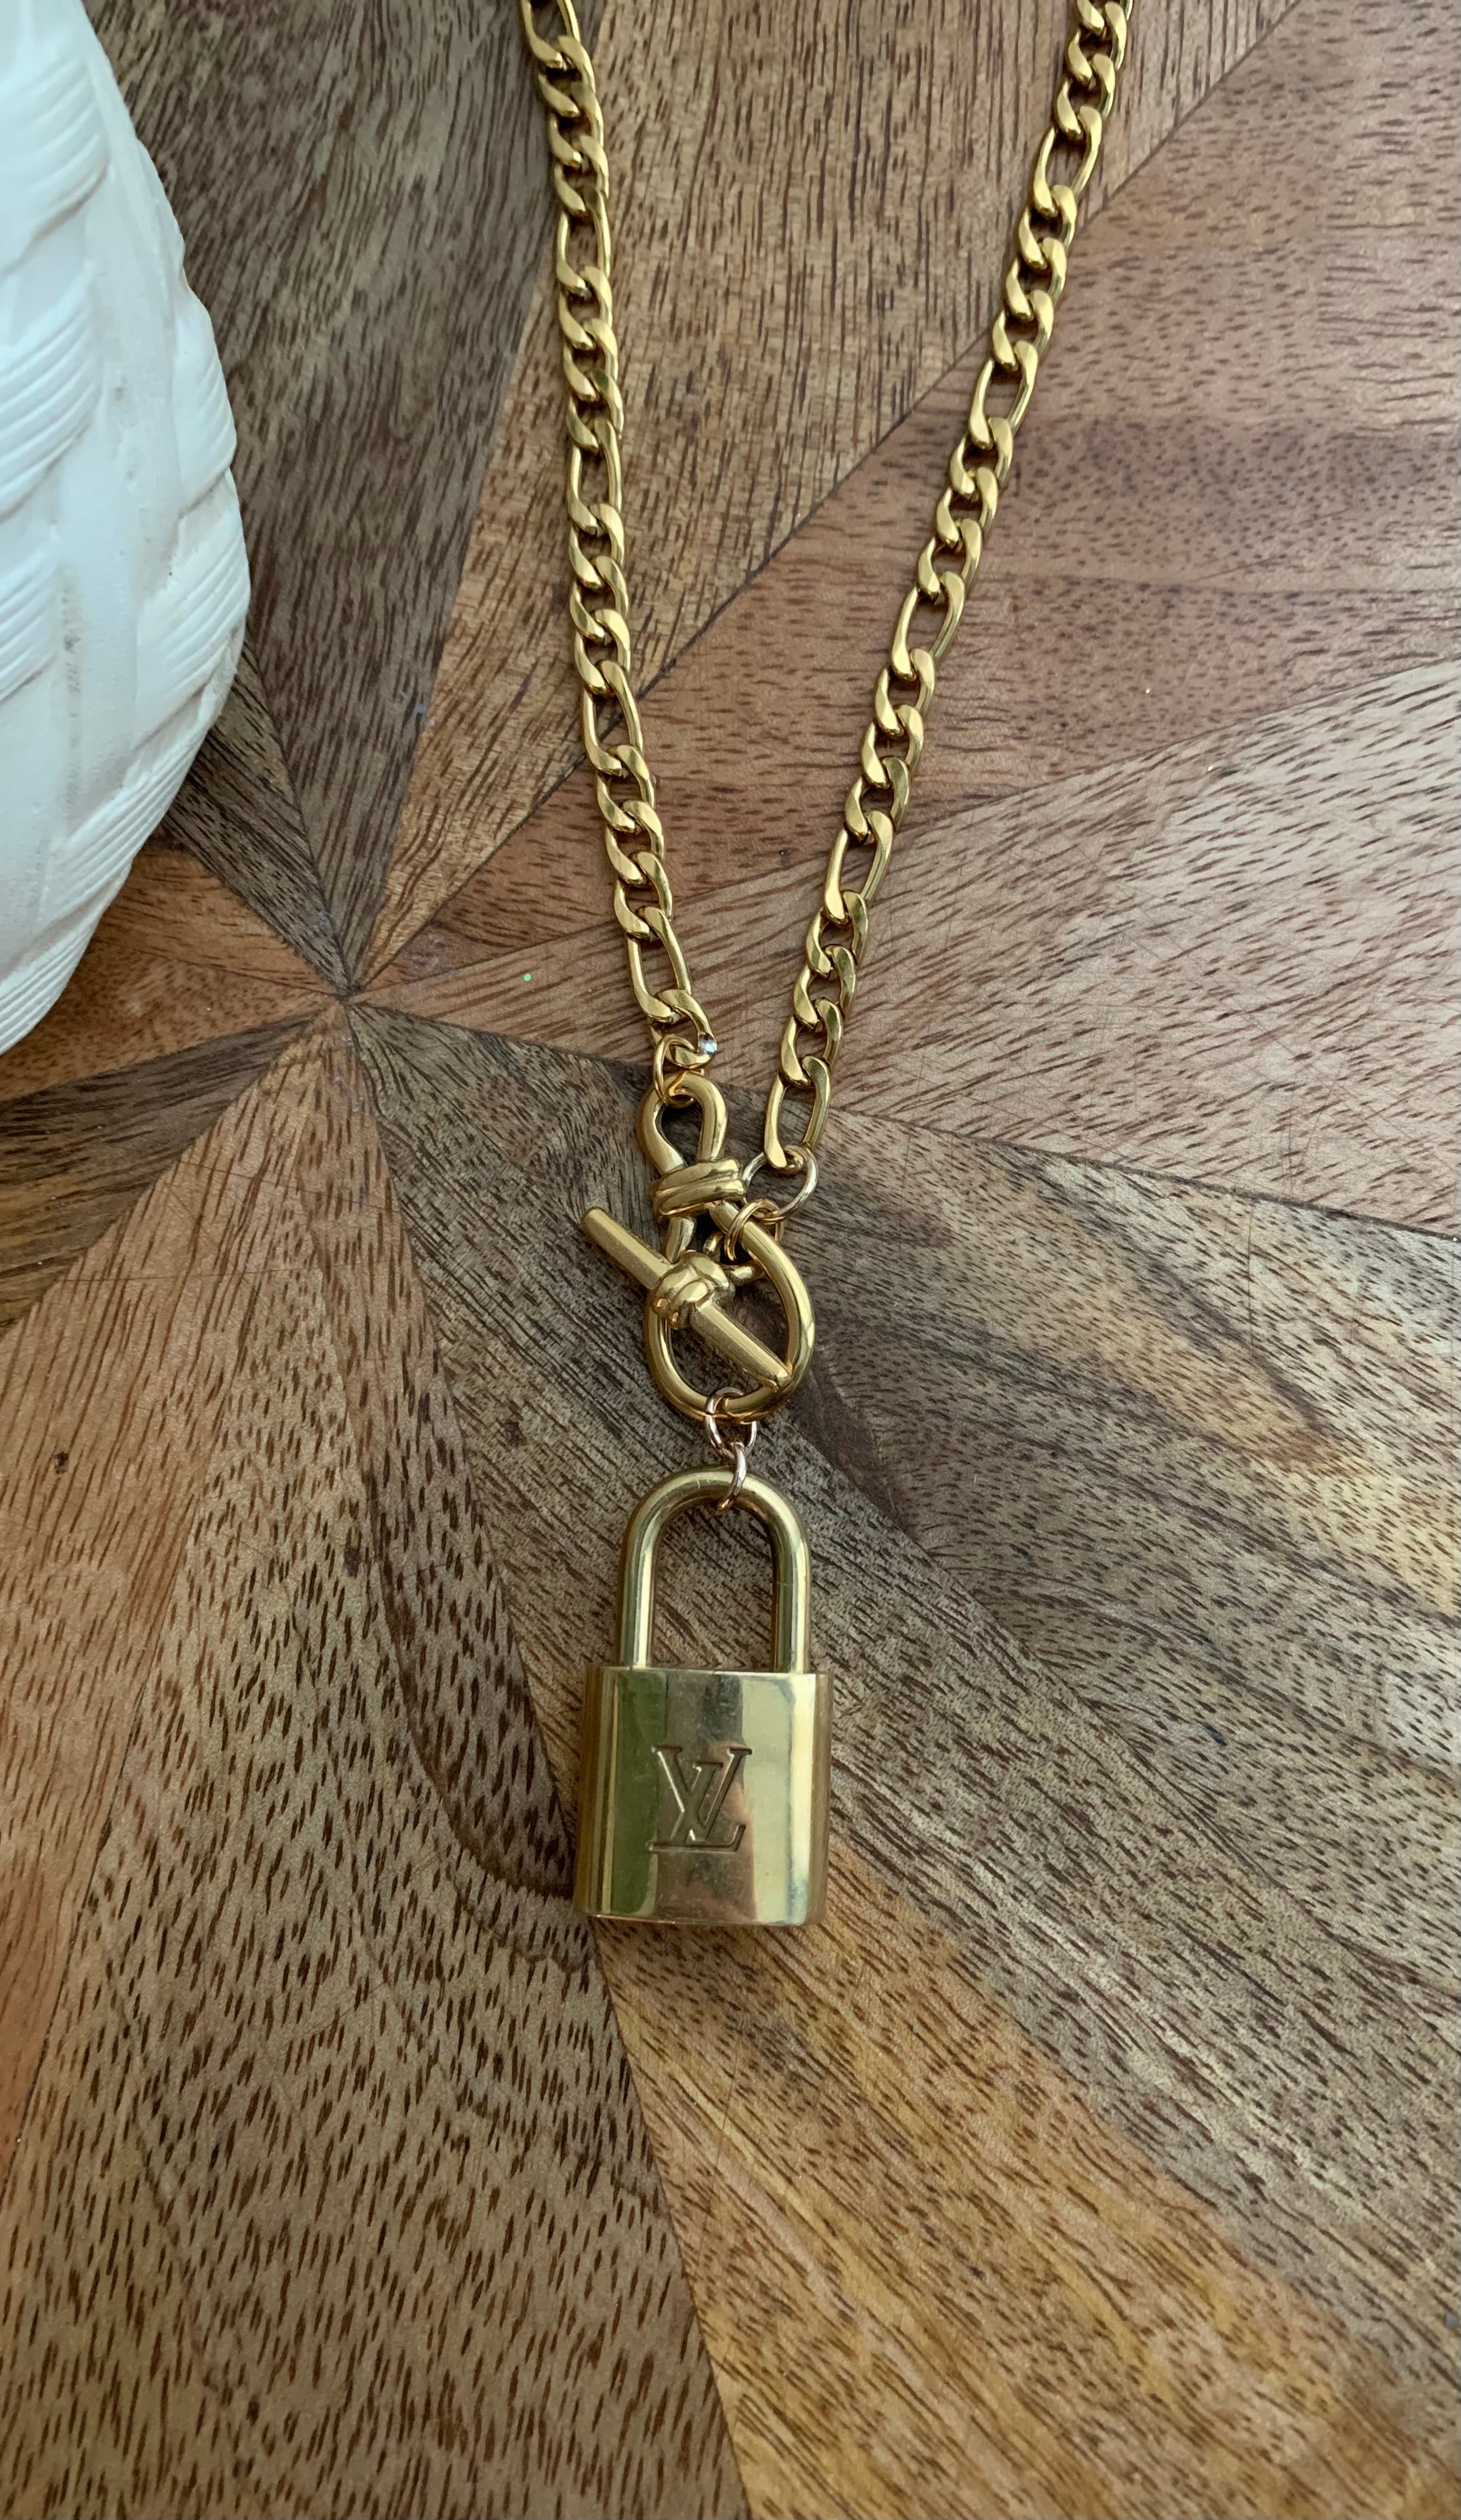 authentic lv lock and key